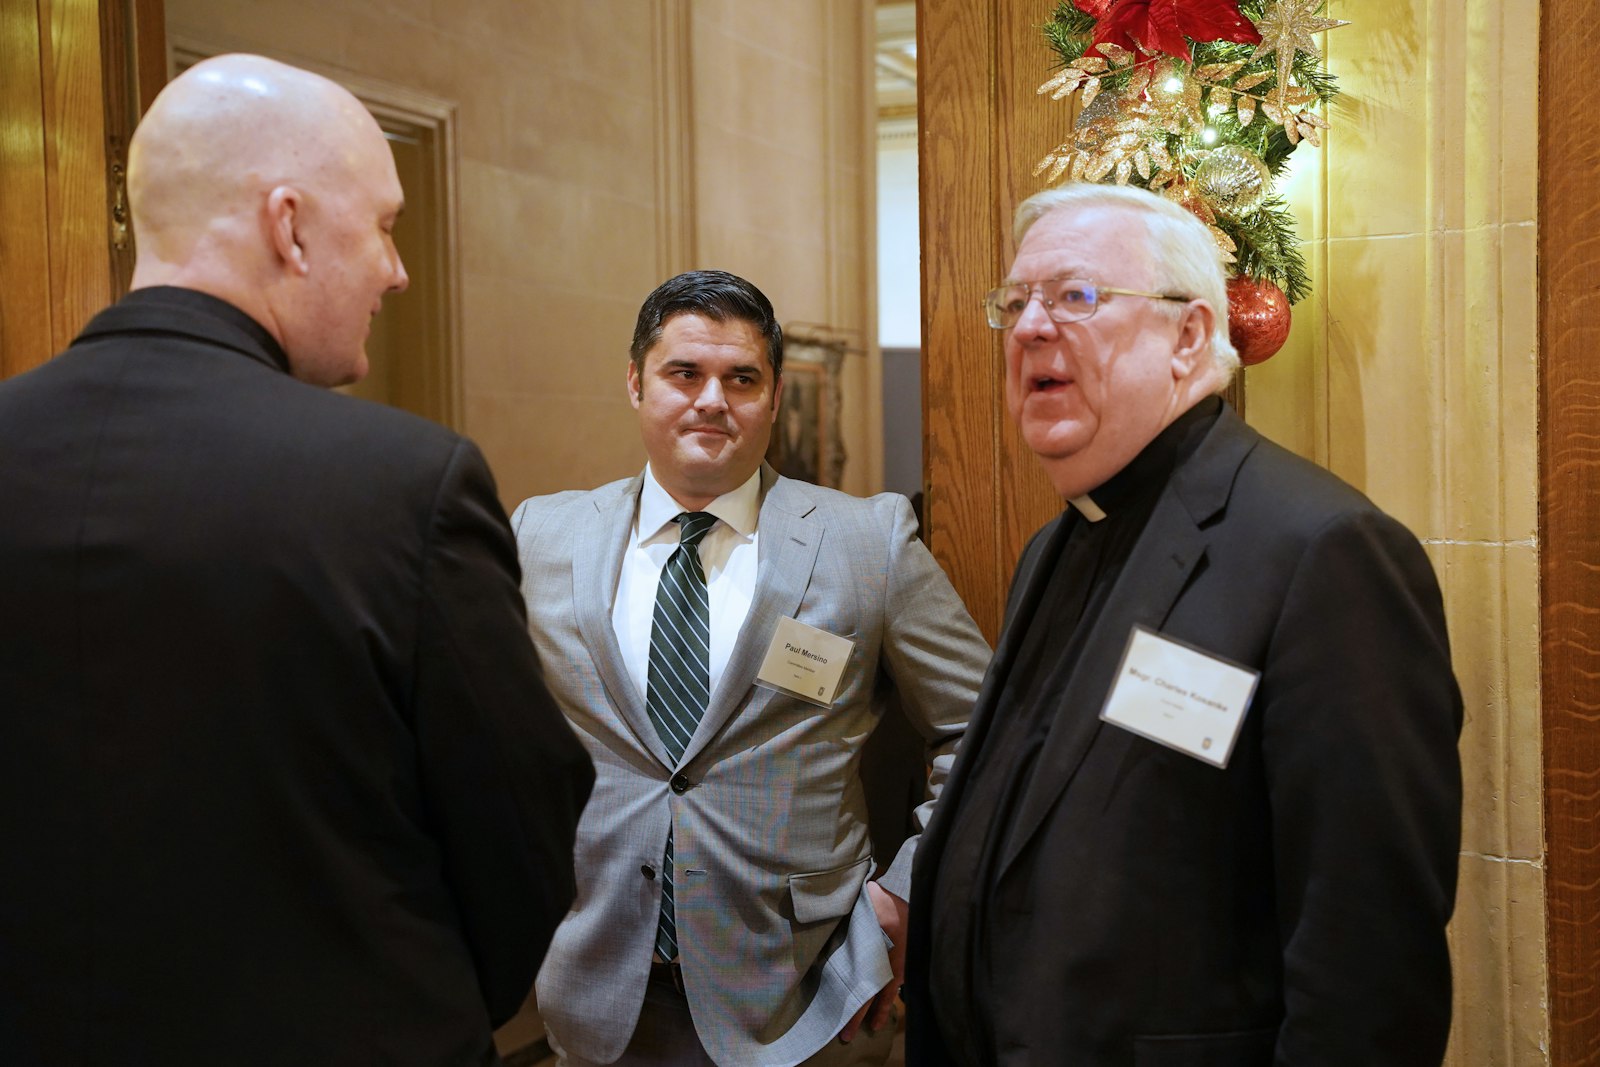 Paul Mersino, a committee member for the Catholic Foundation of Michigan's St. Margaret of Castello Grant, speaks with Fr. Jim Lowe, CC, and Msgr. Chuck Kosanke. The newly established St. Margaret of Castello Grant was awarded to Divine Child High School in Dearborn for expanding its inclusion program for students with special needs.